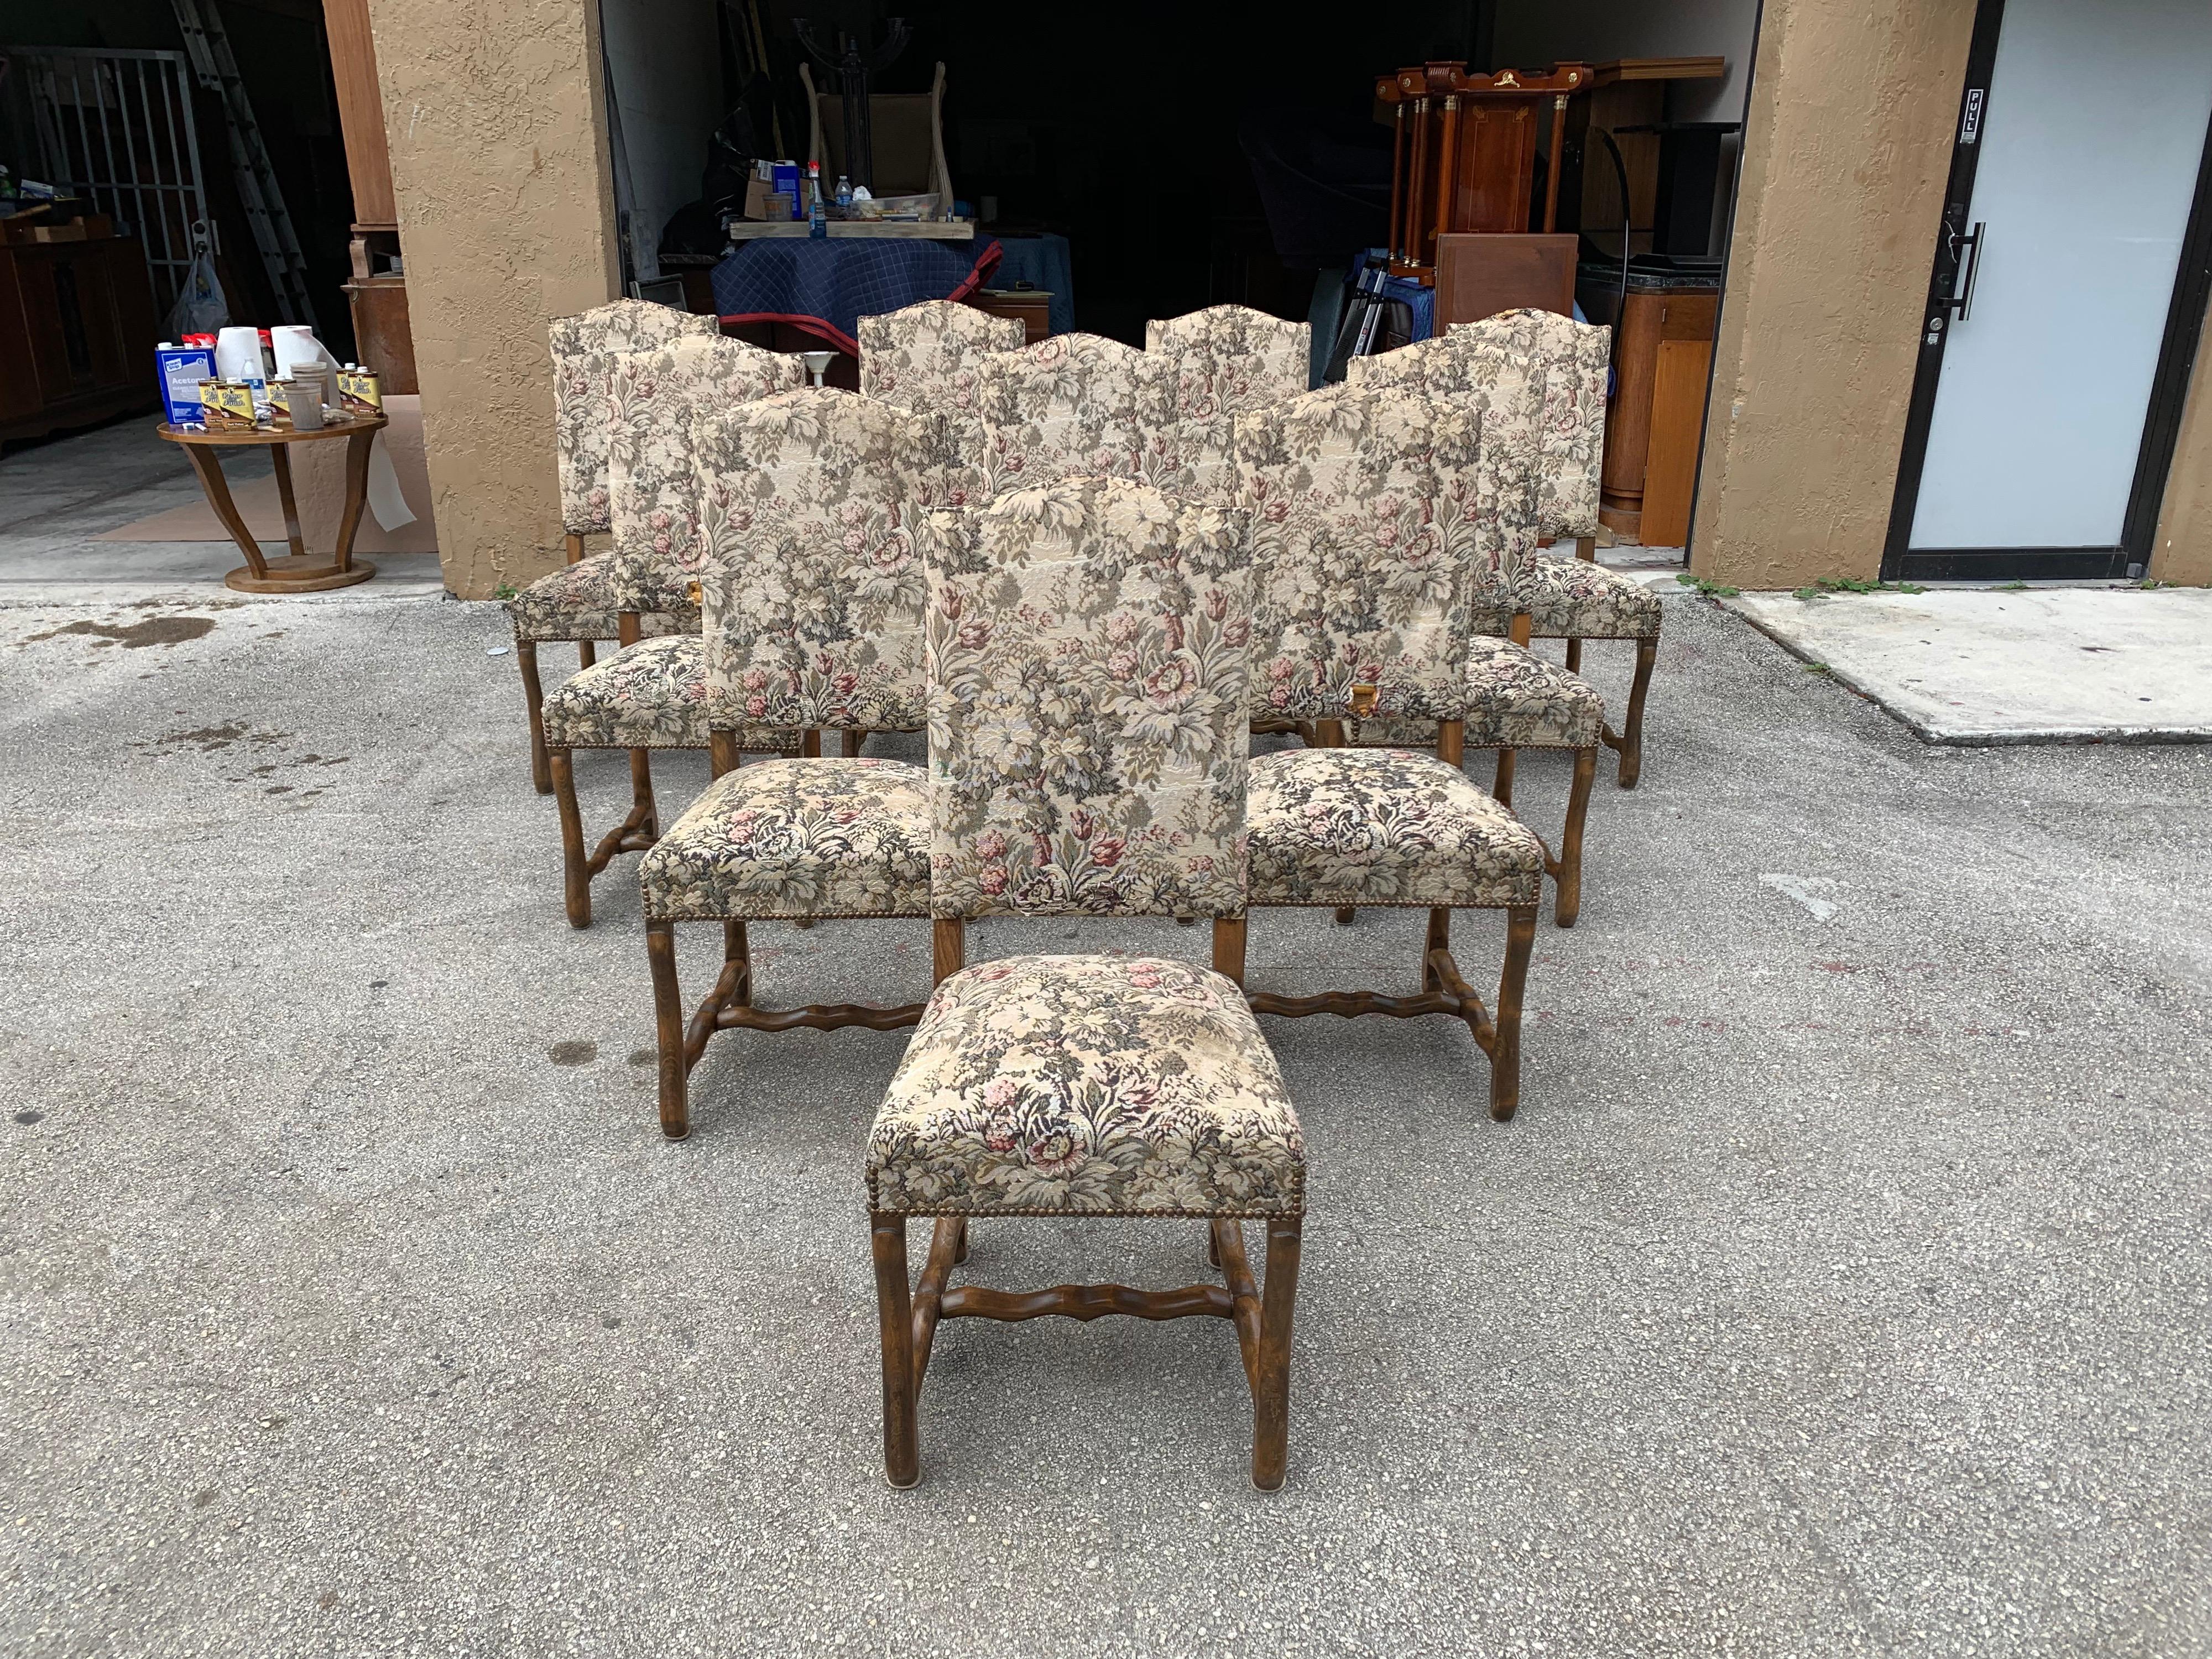 Fine set of 10 Louis XIII style Os de mouton dining chairs with chapeau de gendarme backs, circa 1900s century. Vintage fabric upholstery with nailheads, solid walnut chair frames are in excellent condition. From Lyon. Fabric recommended to be